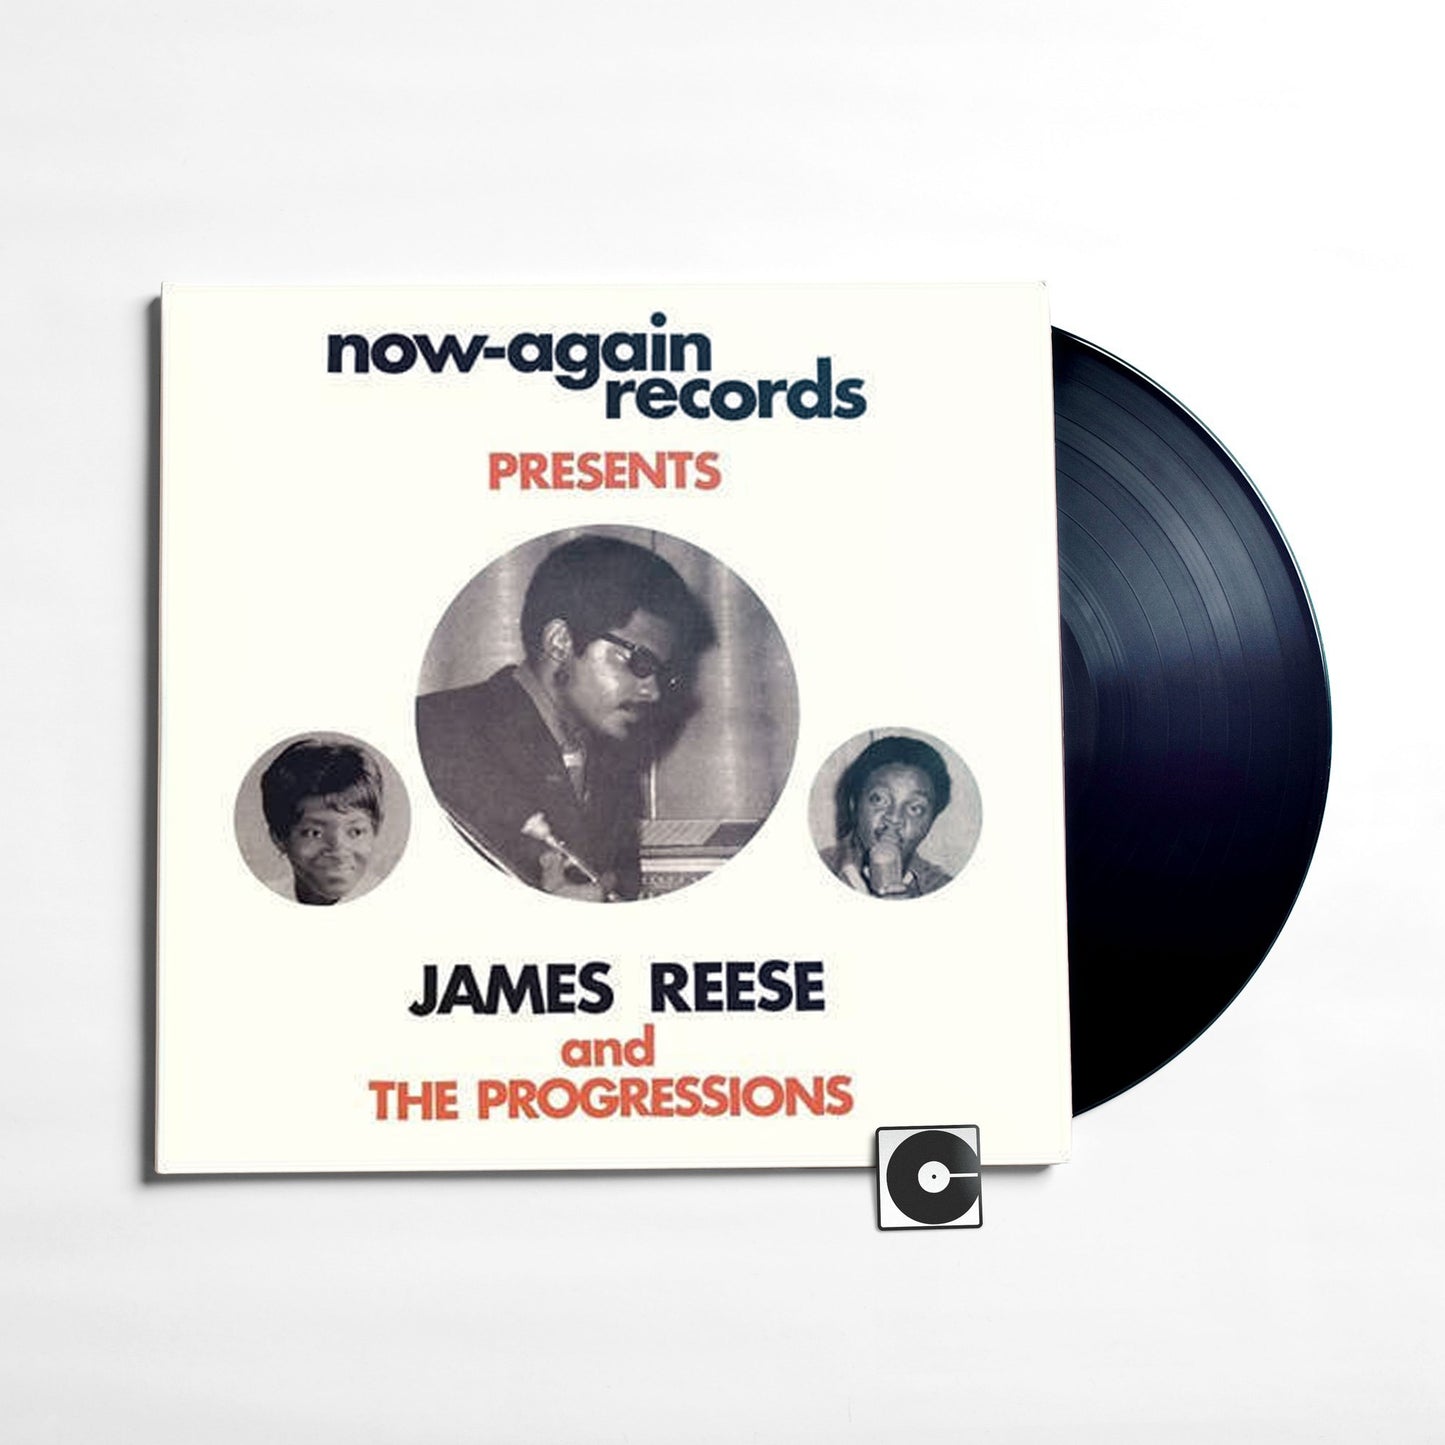 James Reese And The Progressions - "Wait For Me: The Complete Works 1967 - 1972"